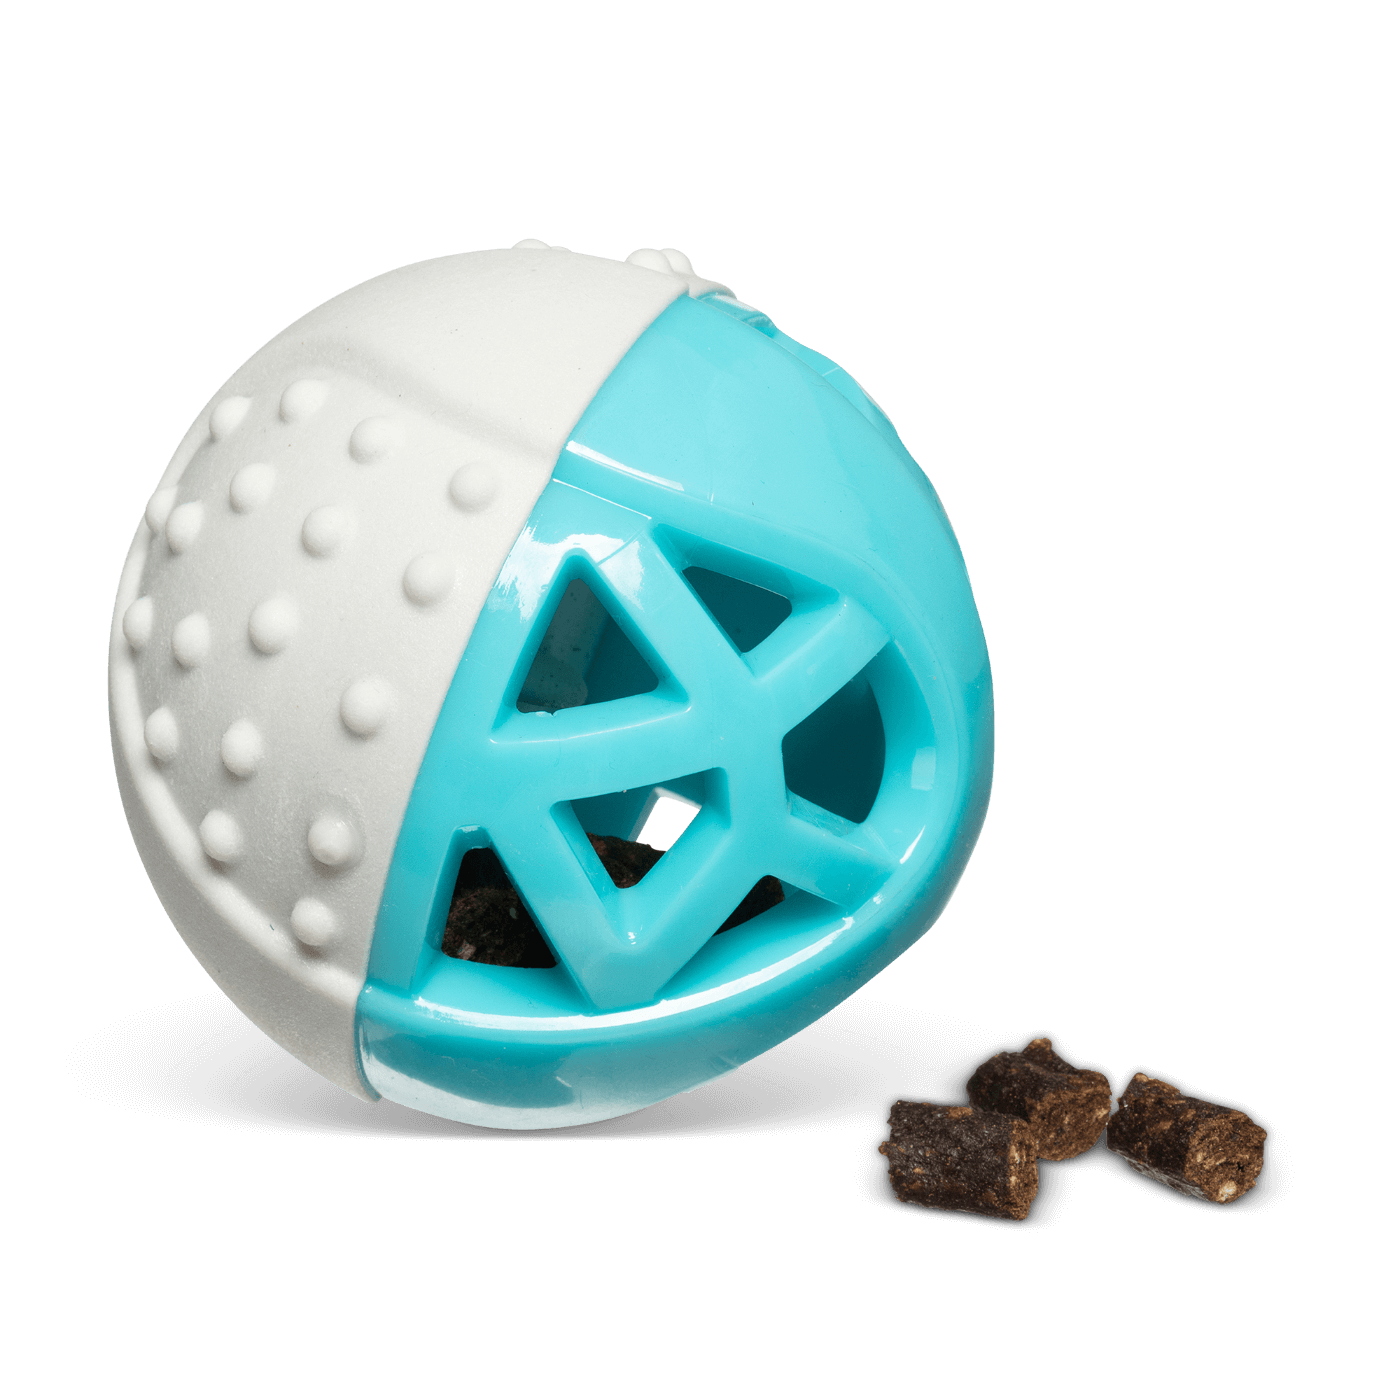 A dog ball you can stuff with treats for prolonging the fun and engaging your pet.  